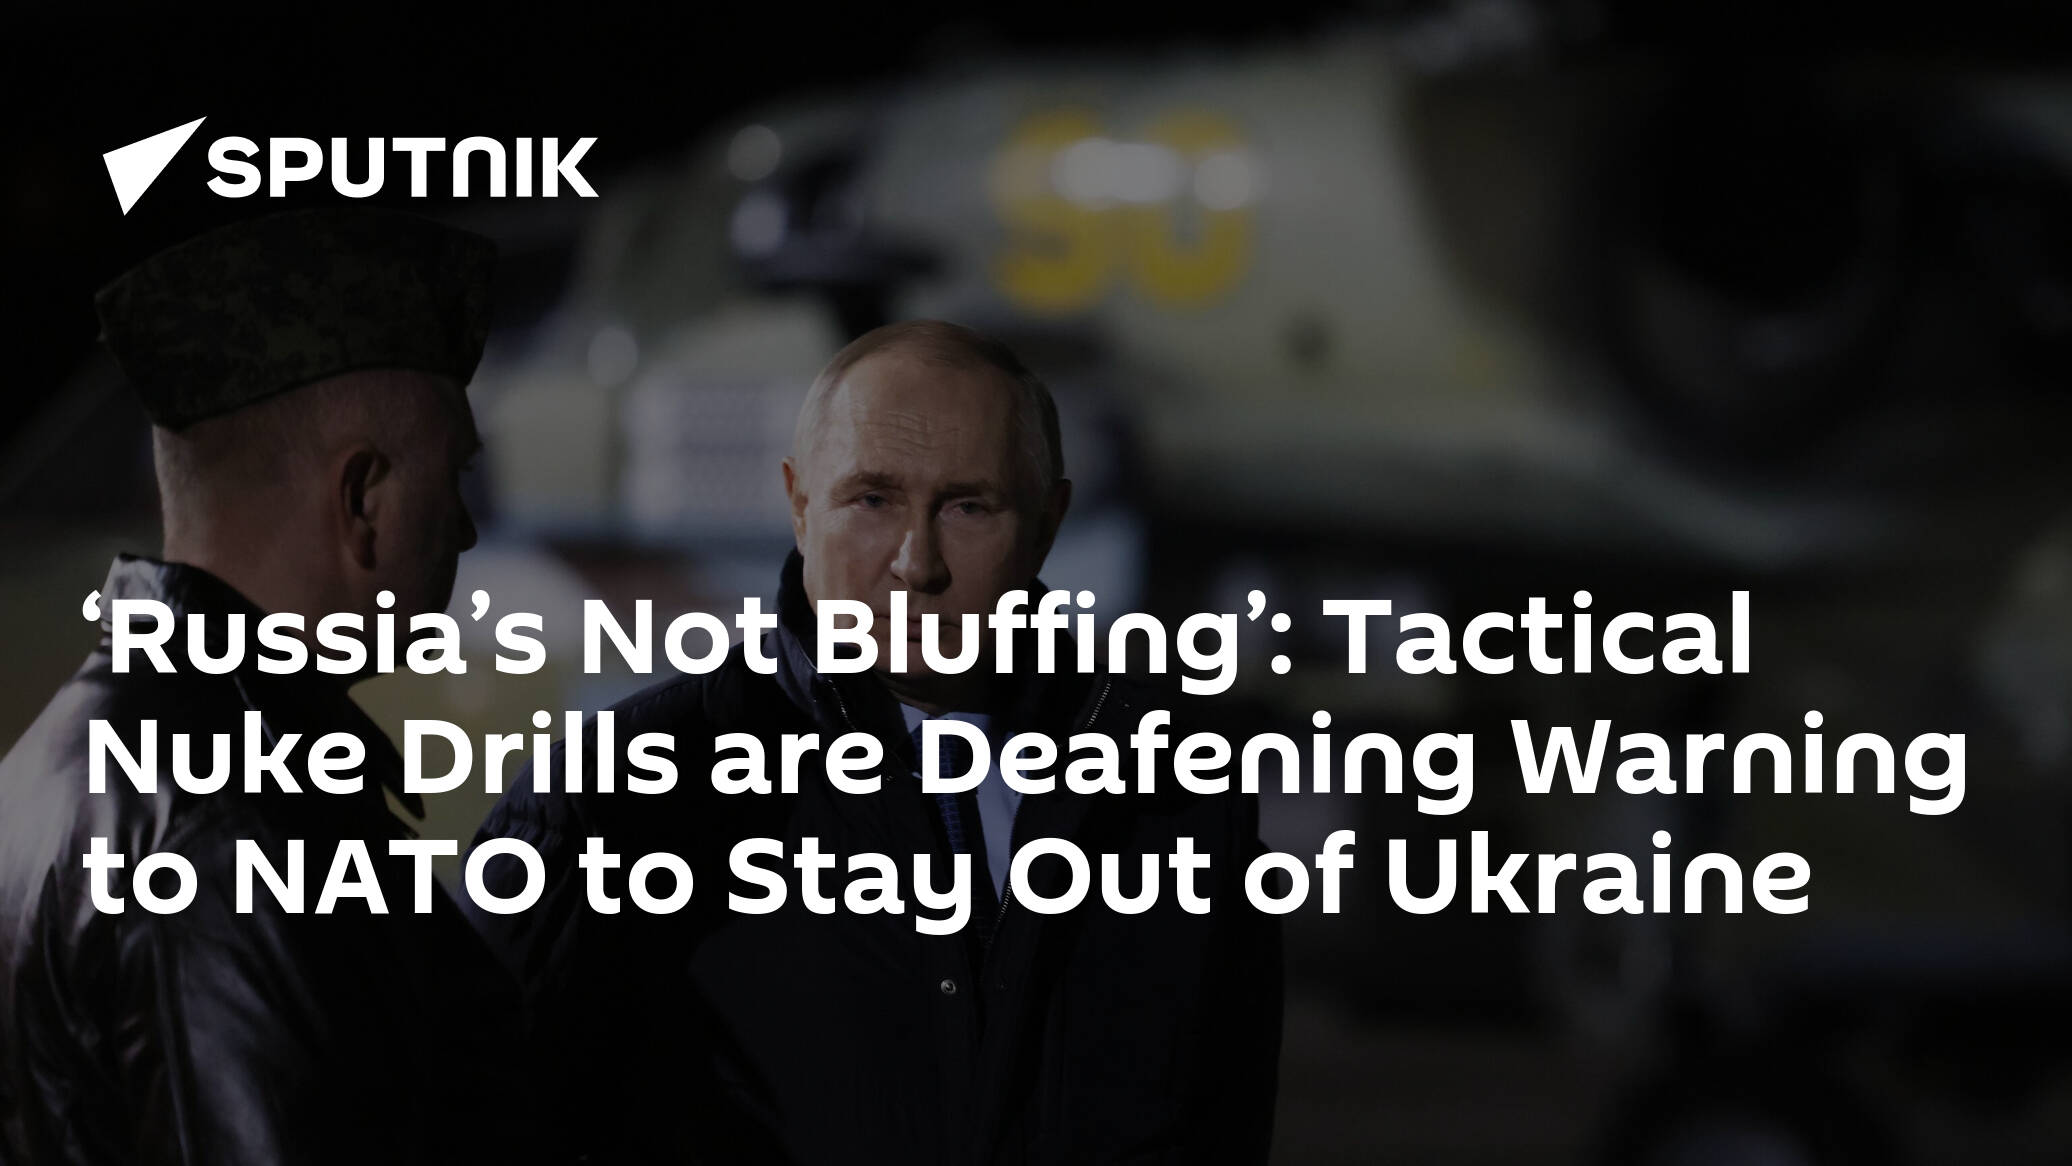 ‘Russia’s Not Bluffing’: Tactical Nuke Drills are Deafening Warning to NATO to Stay Out of Ukraine